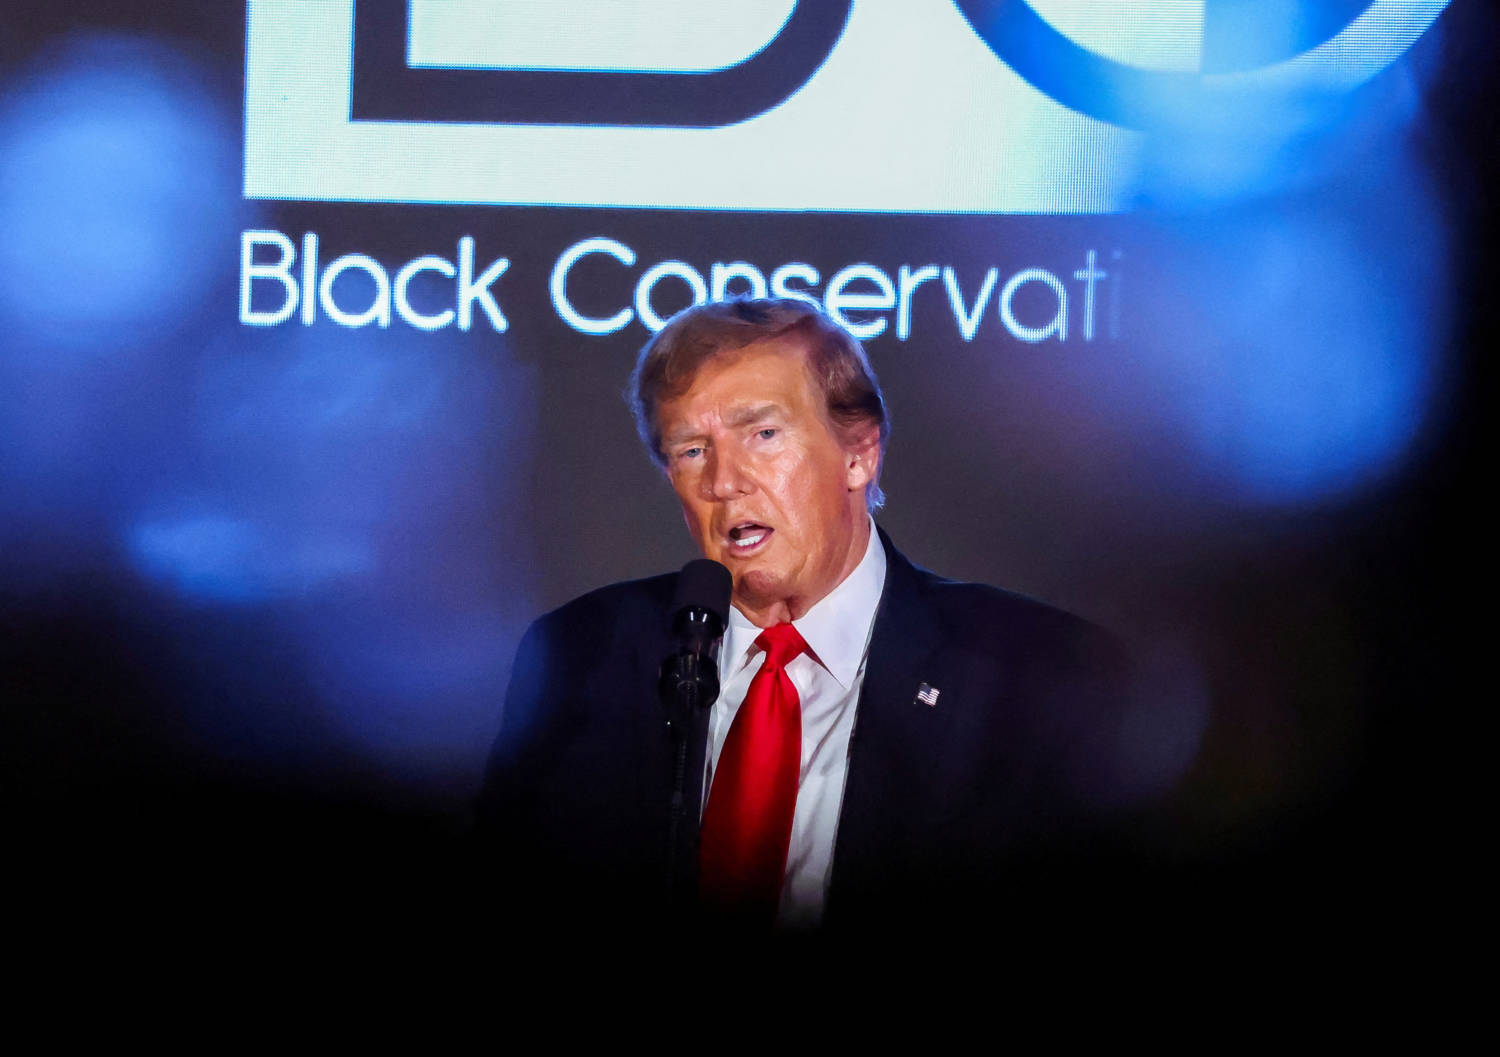 File Photo: Former U.s. President Trump Delivers A Keynote Speech At The Black Conservative Federation Gala Dinner, In Columbia, South Carolina